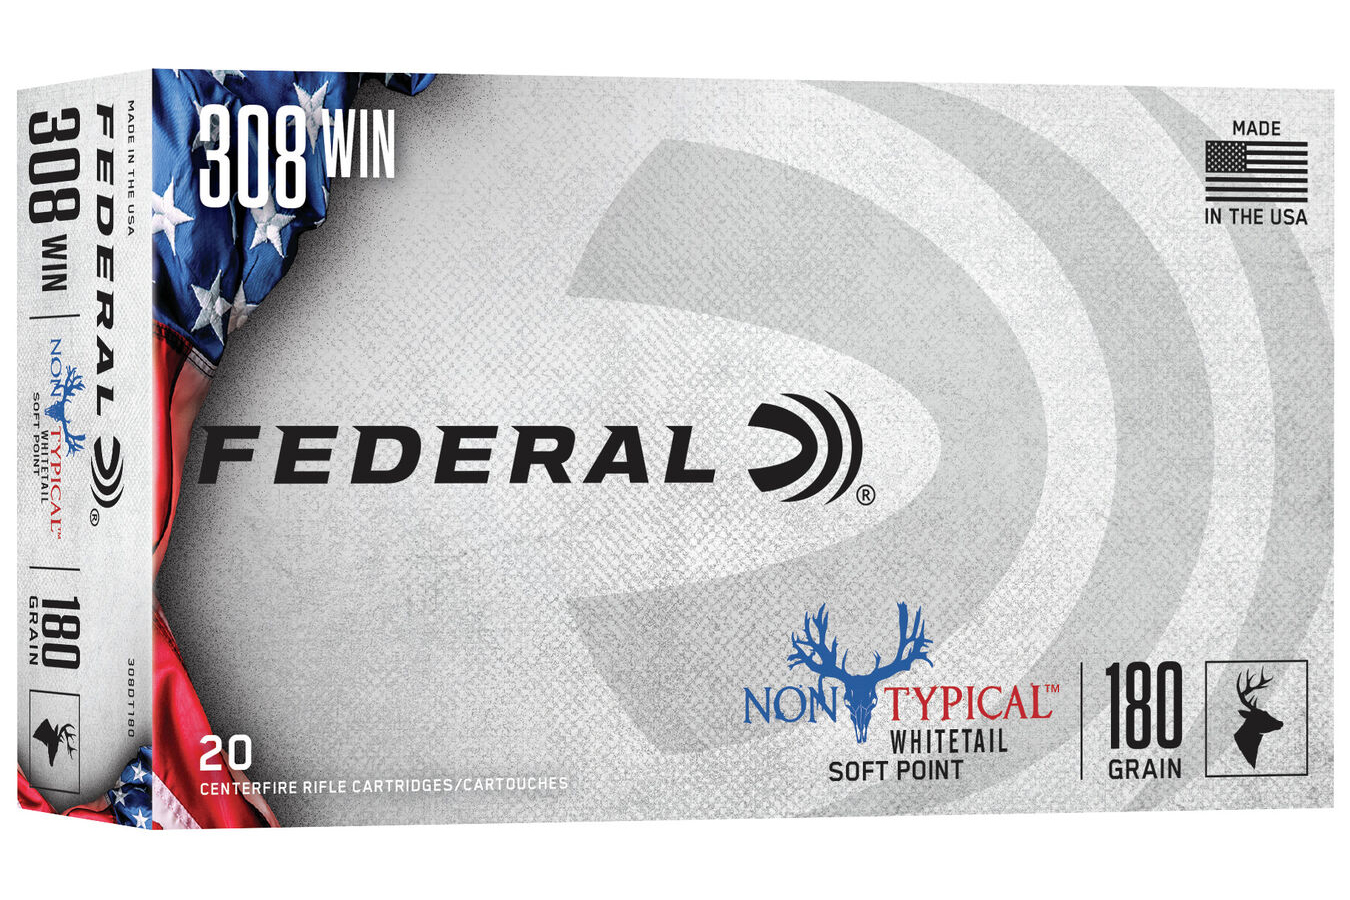 FEDERAL AMMUNITION 308 WIN 180 GR NON TYPICAL SOFT POINT